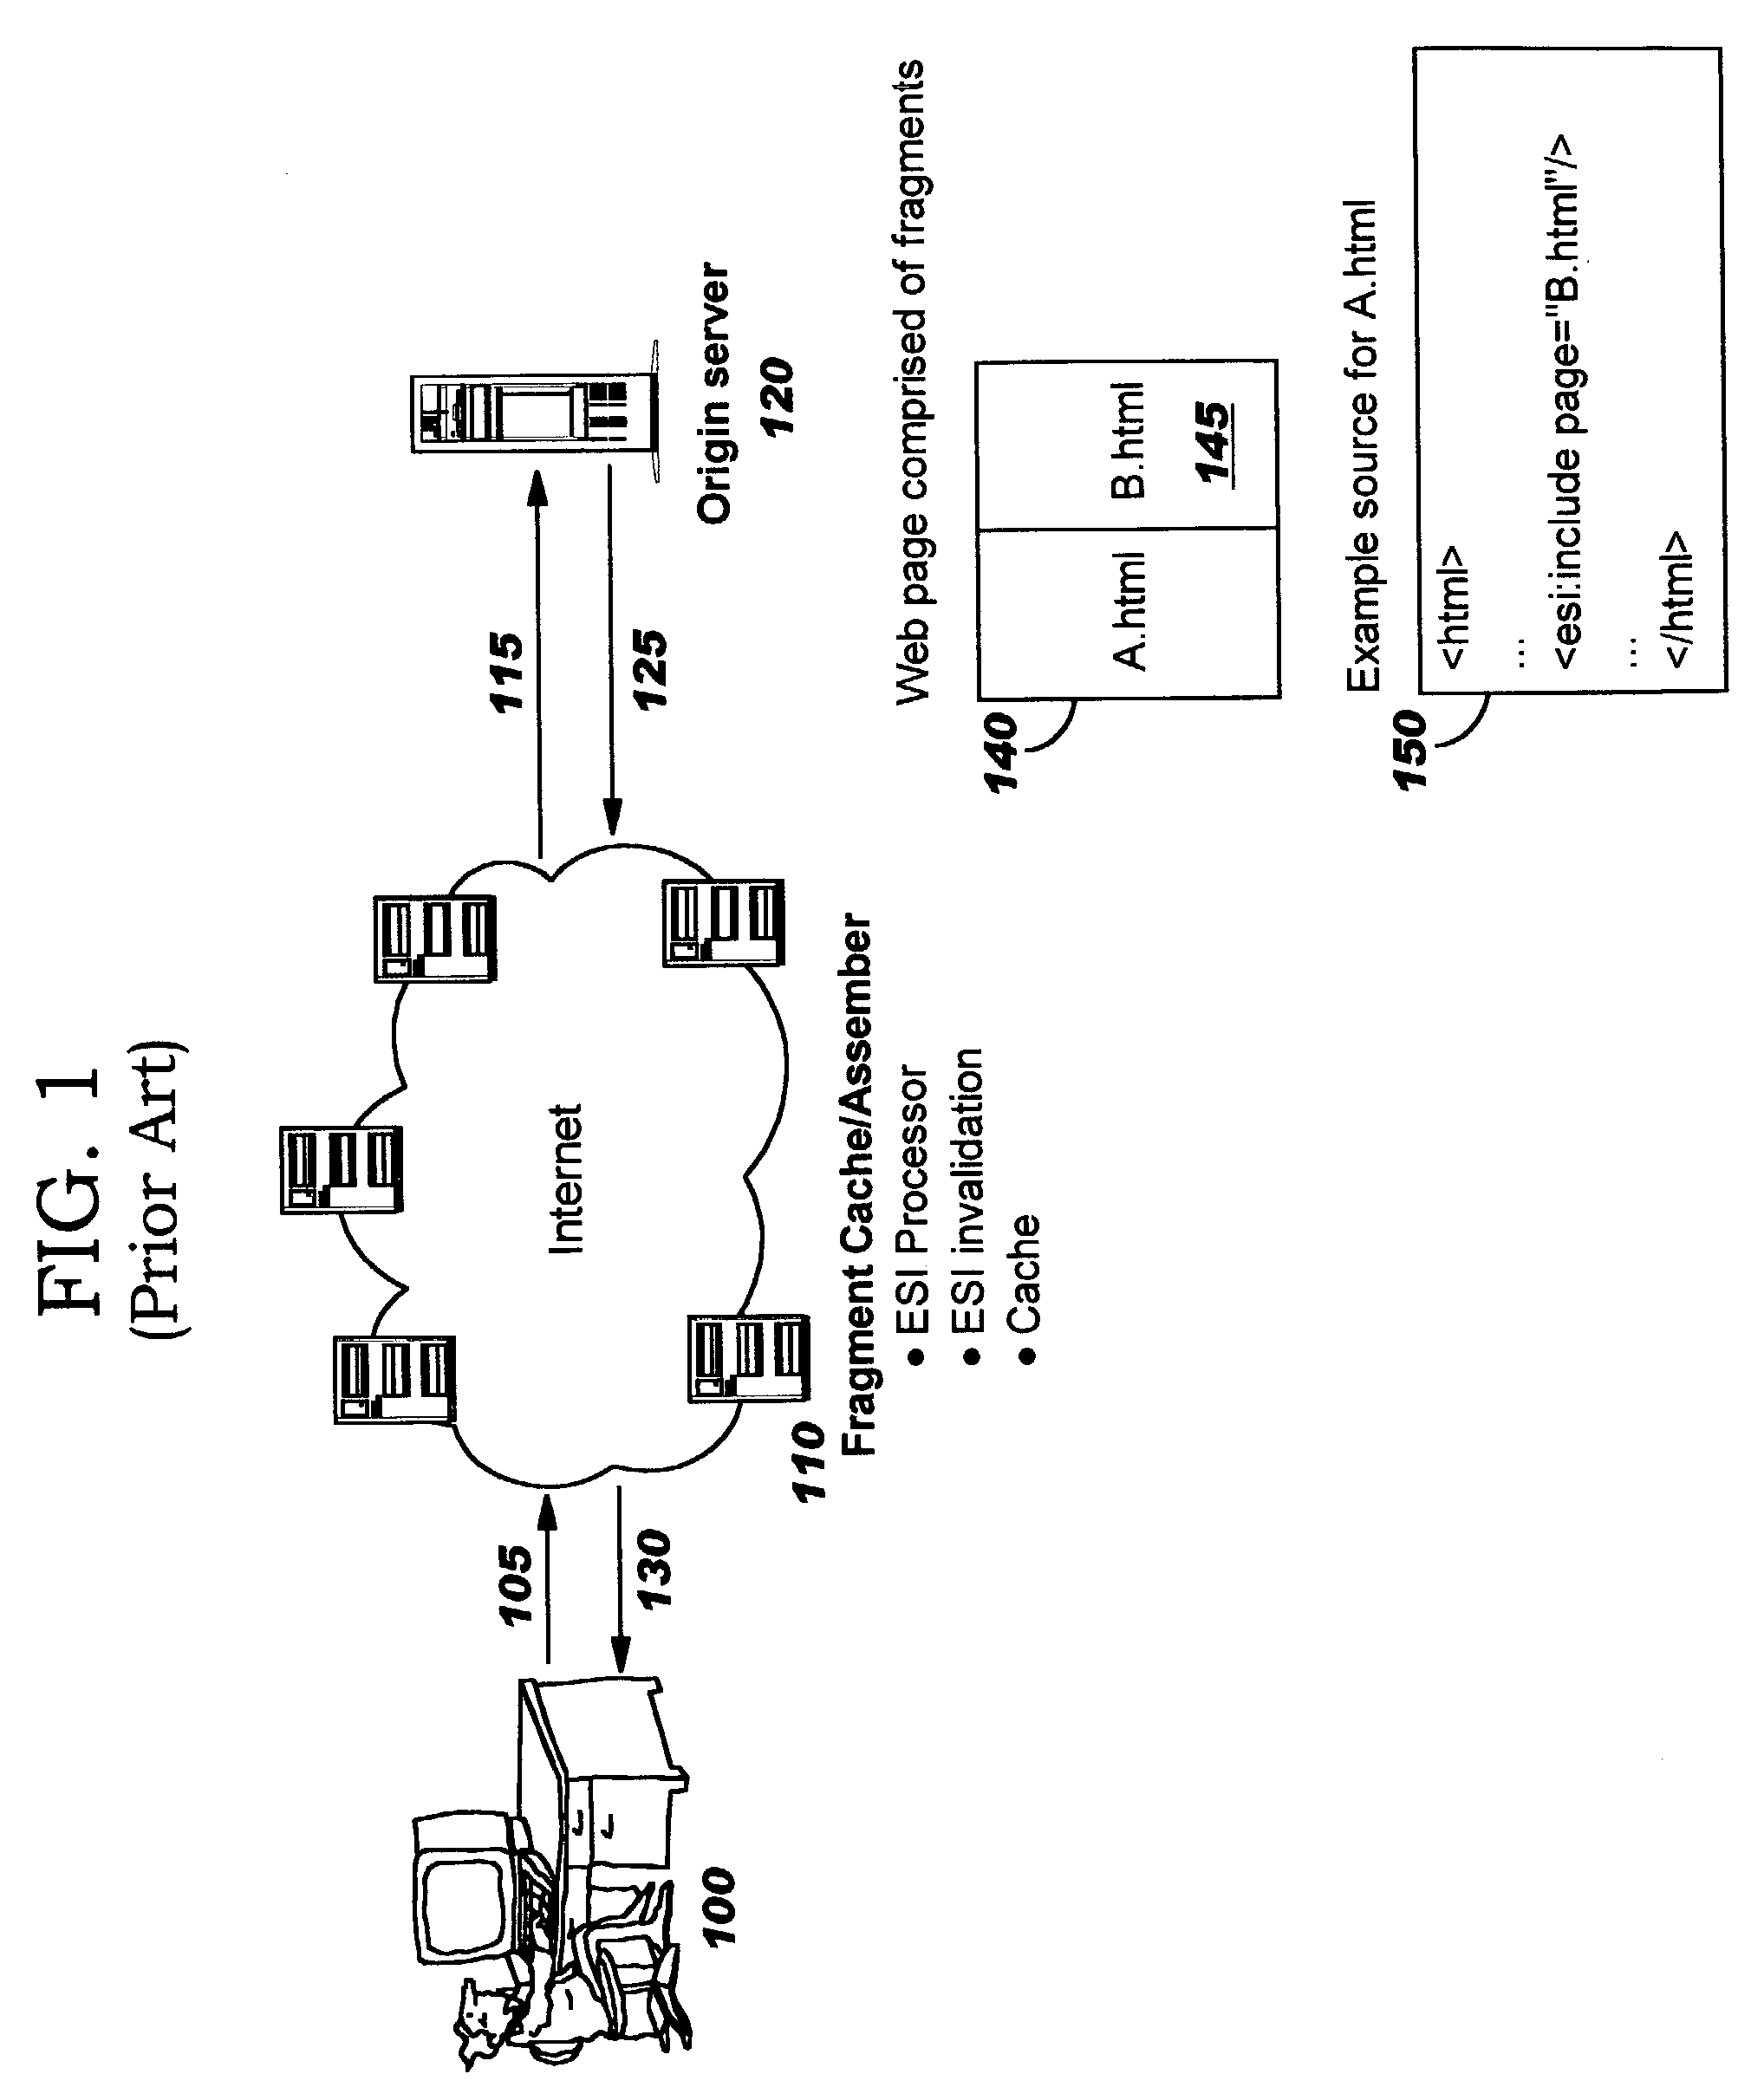 Non-invasive technique for enabling distributed computing applications to exploit distributed fragment caching and assembly